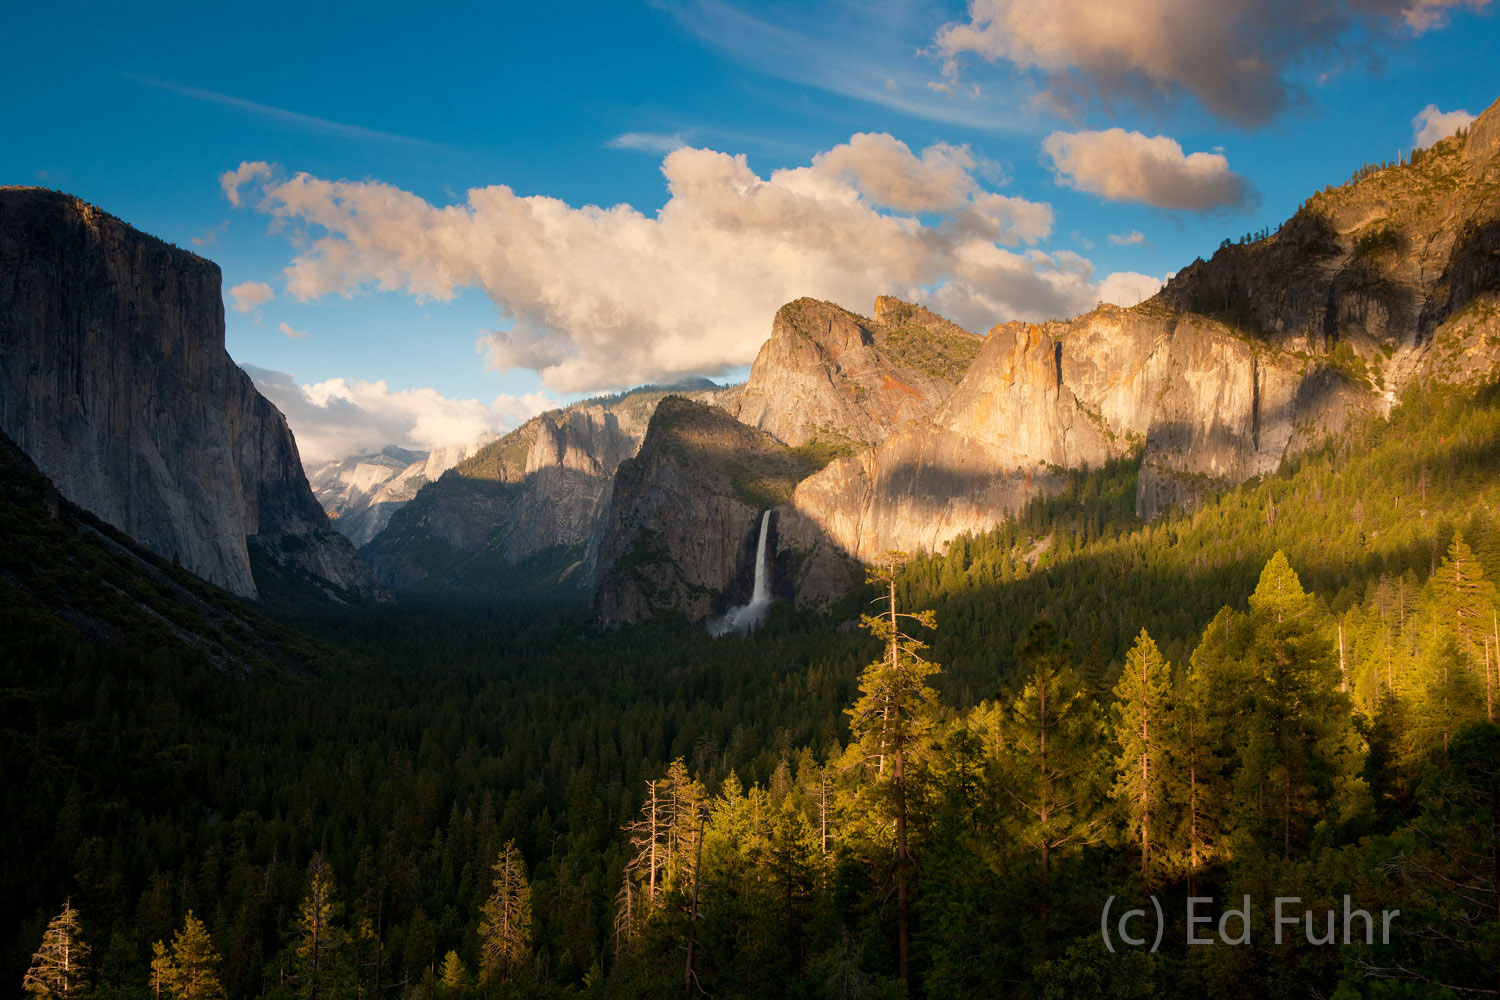 The classic view of the Yosemite Valley at sunset.